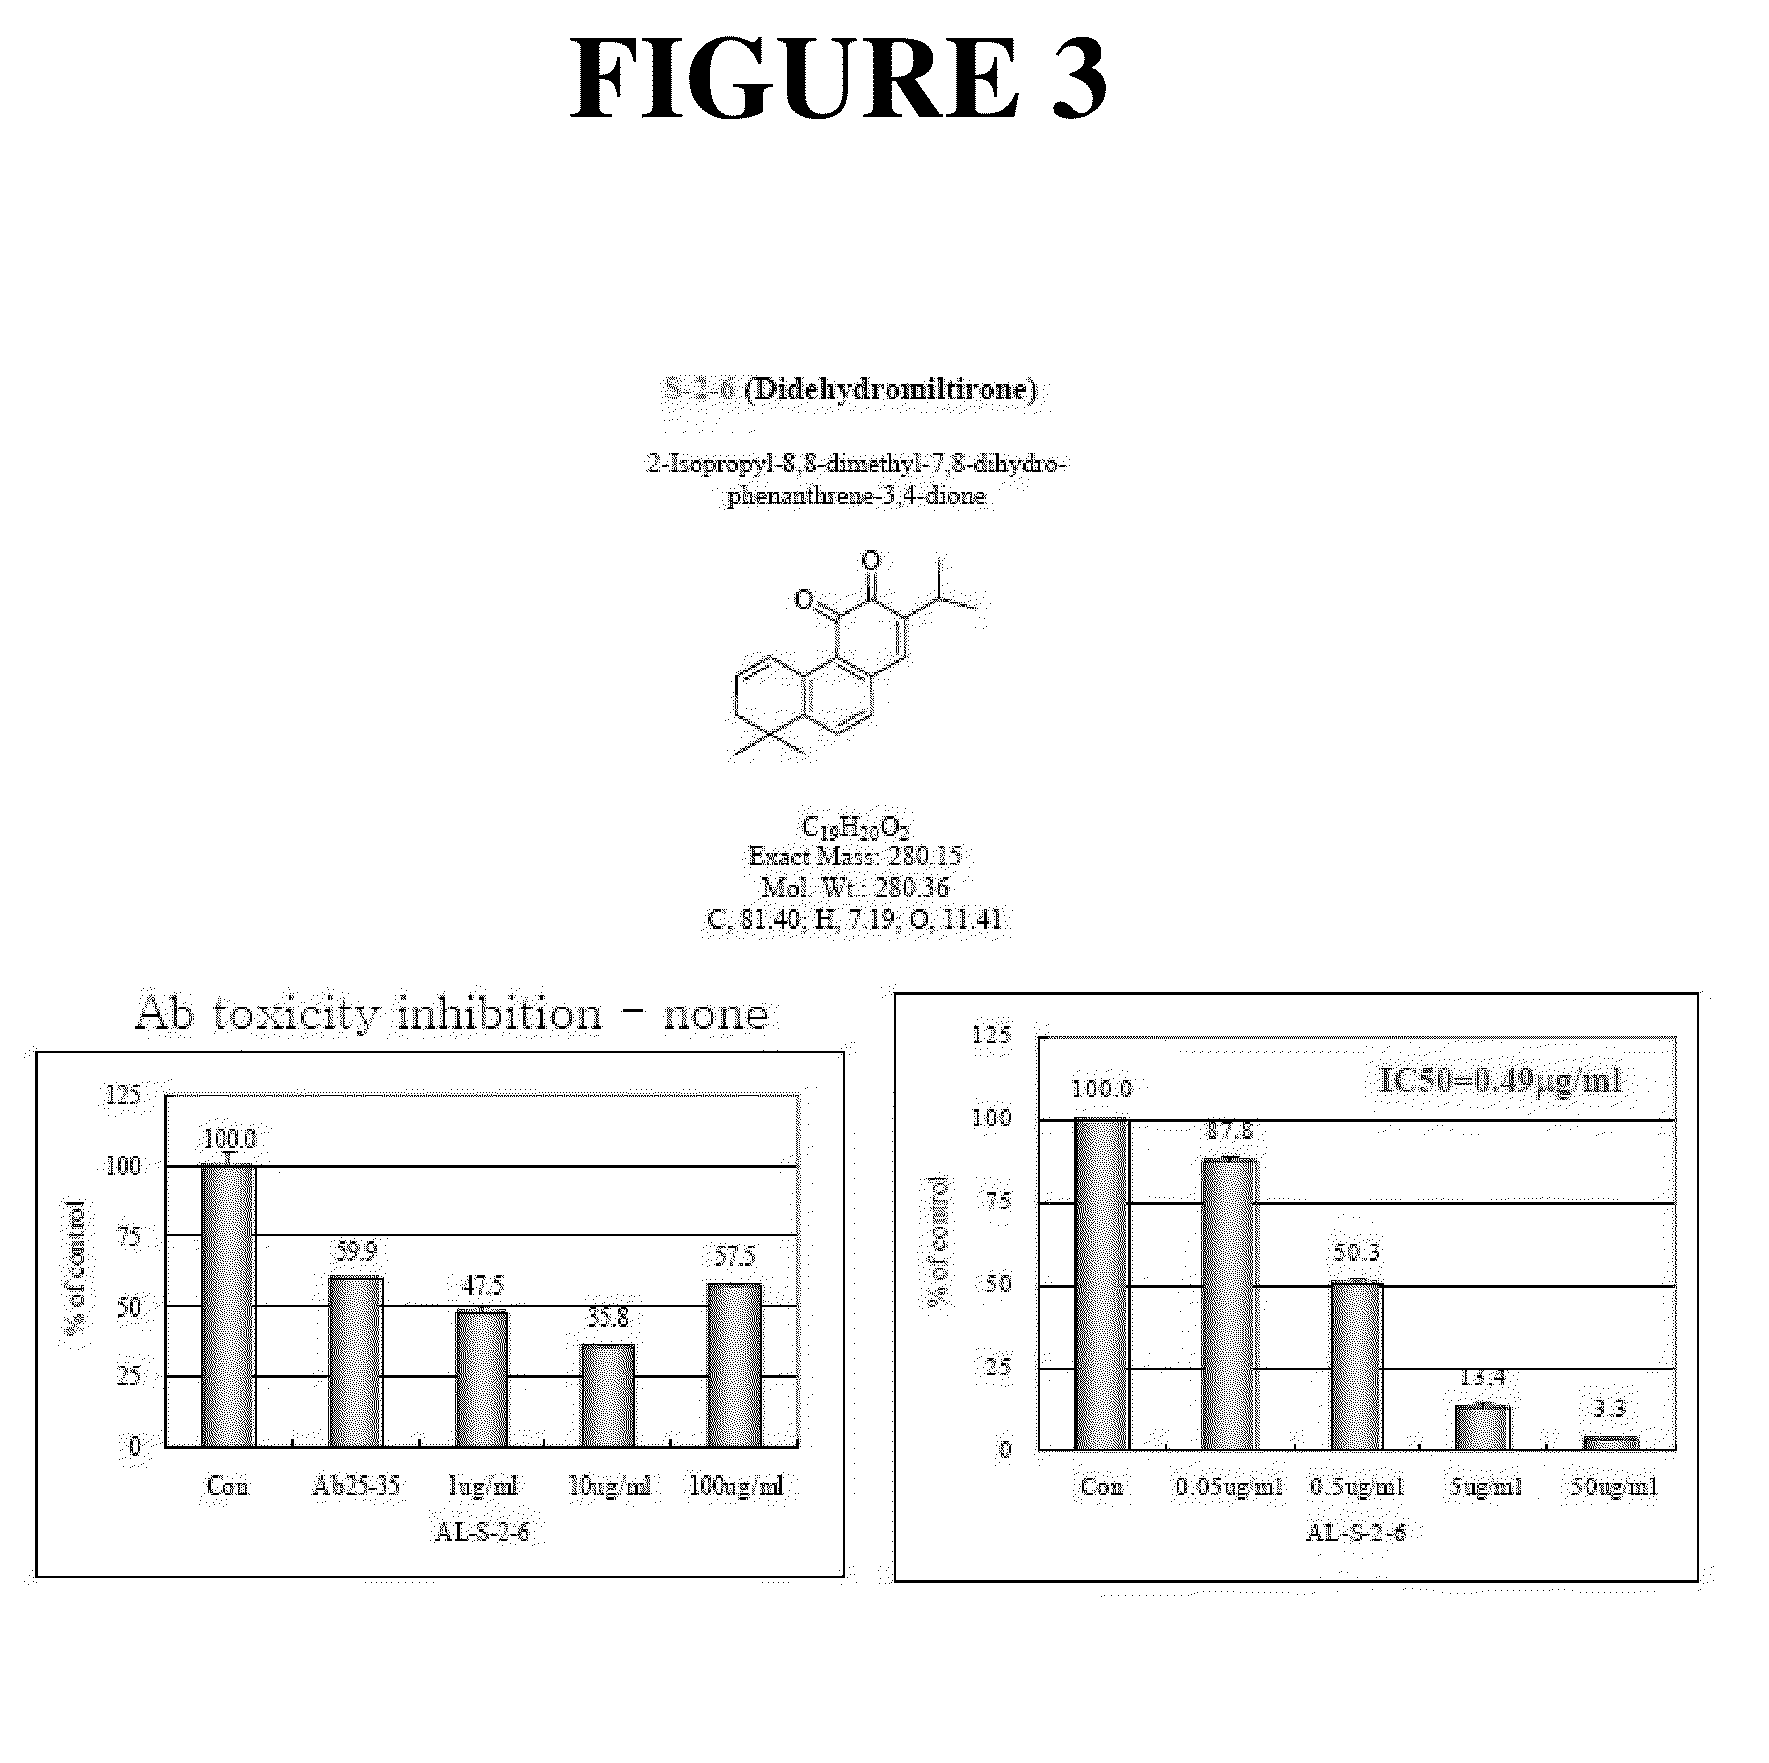 Composition Comprising Tanshinone Compounds Isolated From The Extract Of Salviae Miltiorrhizae Radix For Treating Or Preventing Cognitive Dysfunction And The Use Thereof